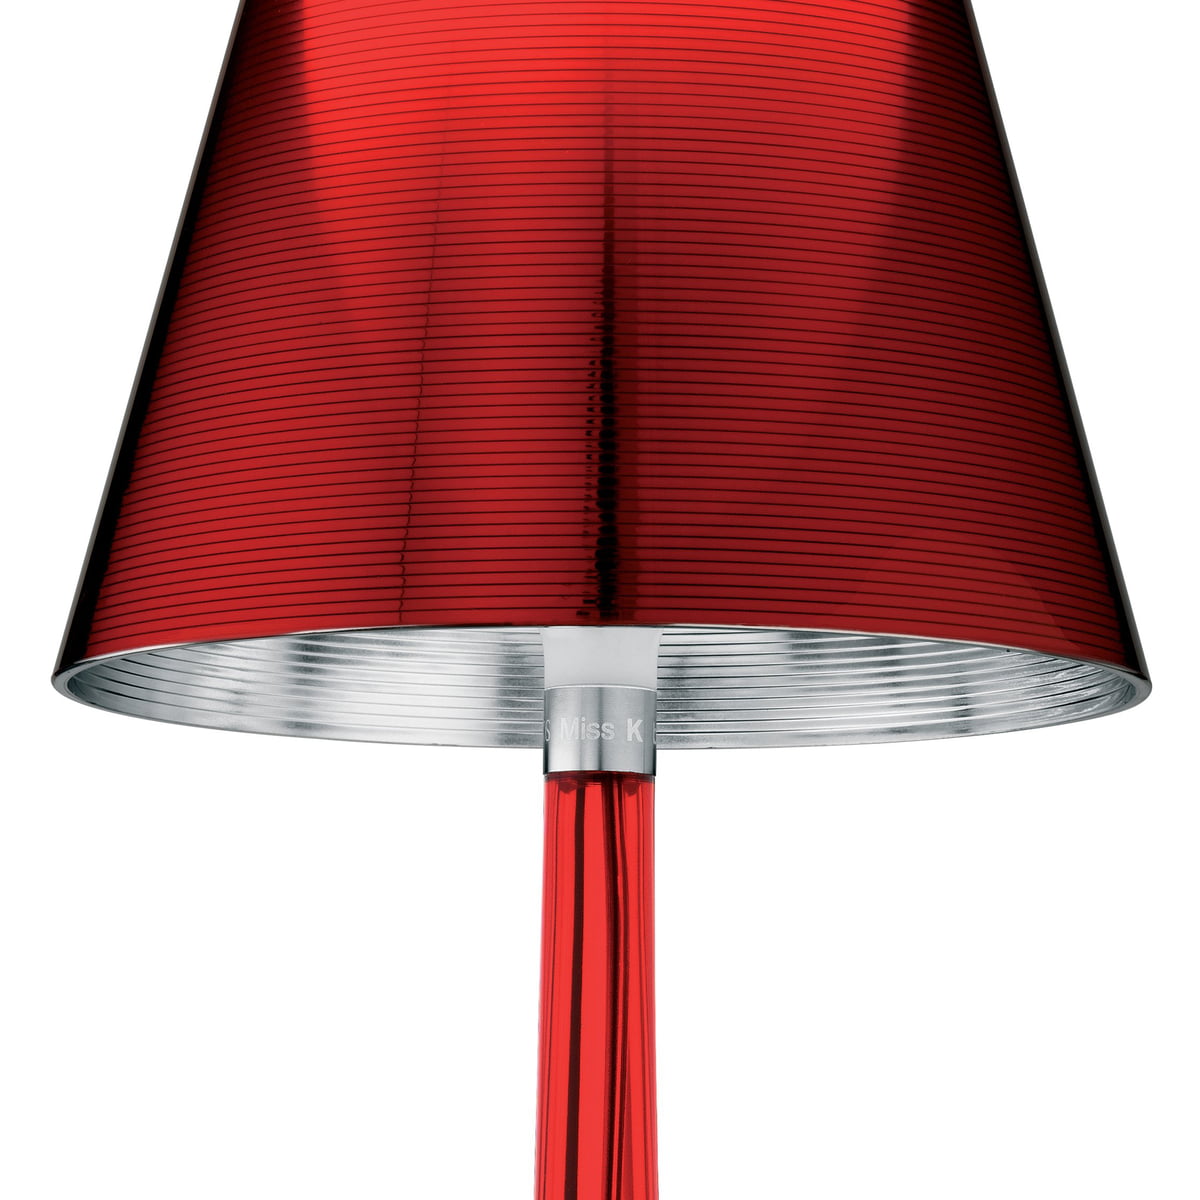 Miss K table lamp by Flos in the design shop